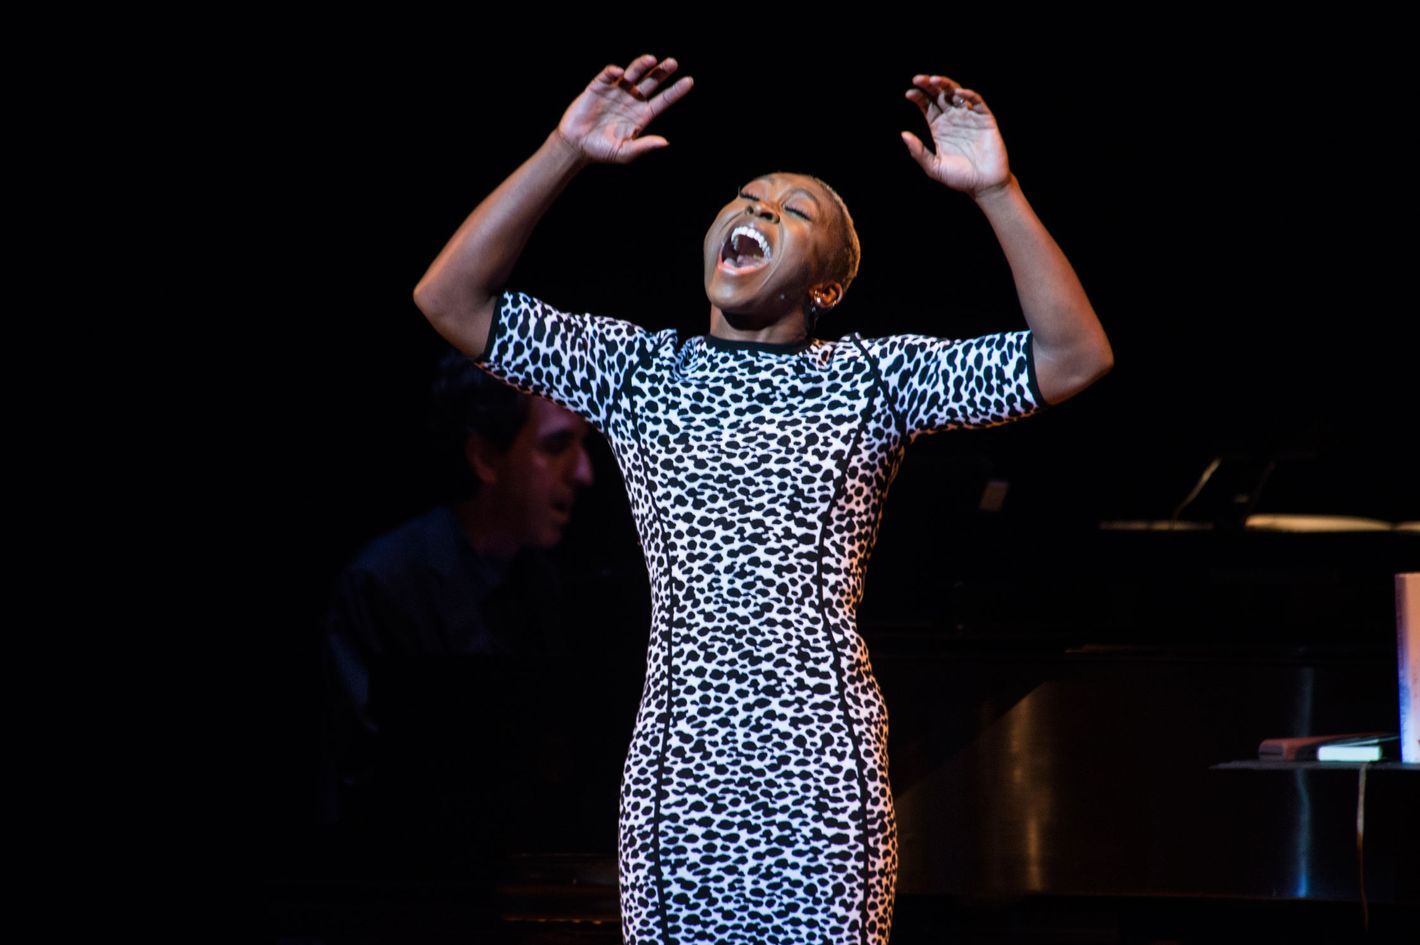 Cynthia Erivo Singing ‘Still Hurting’ Will Make You Feel Just a Little